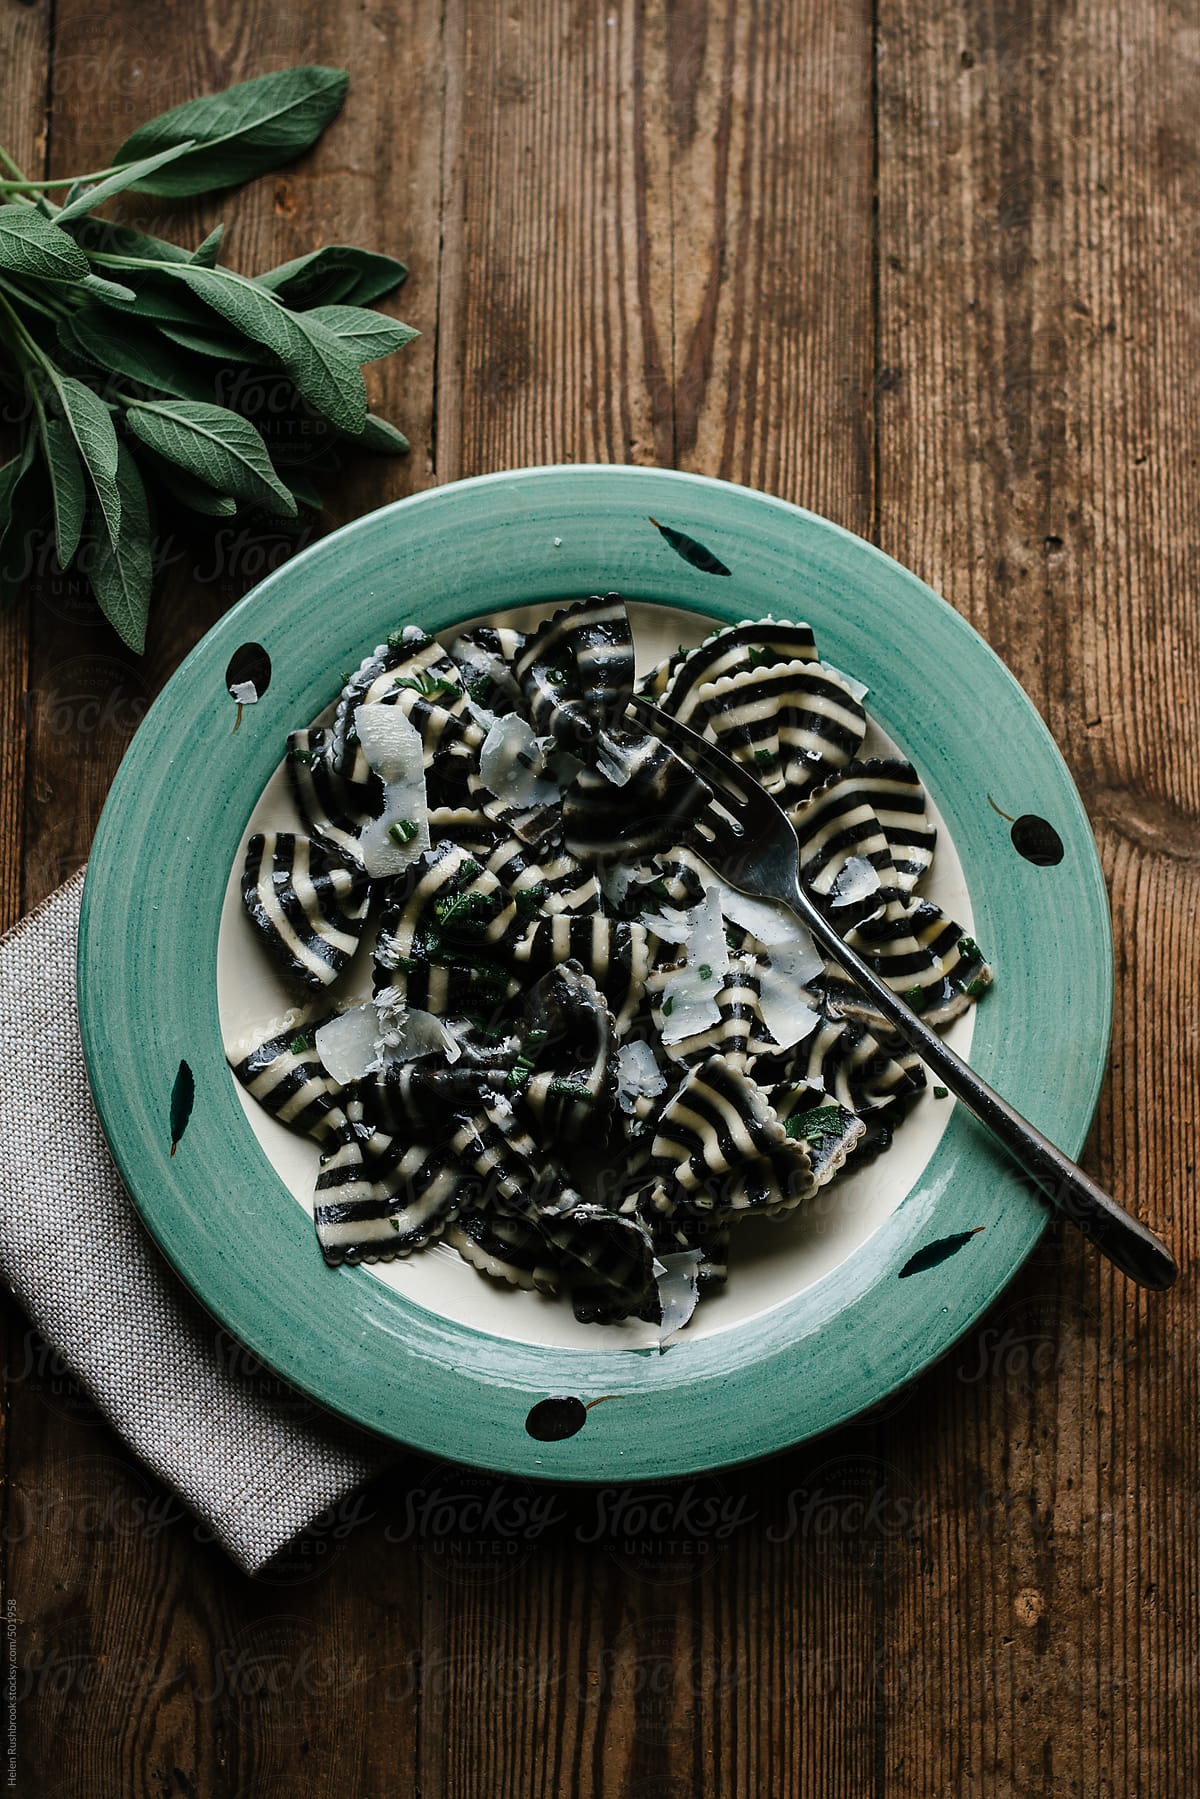 Black and white striped Farfalle pasta with sage butter.